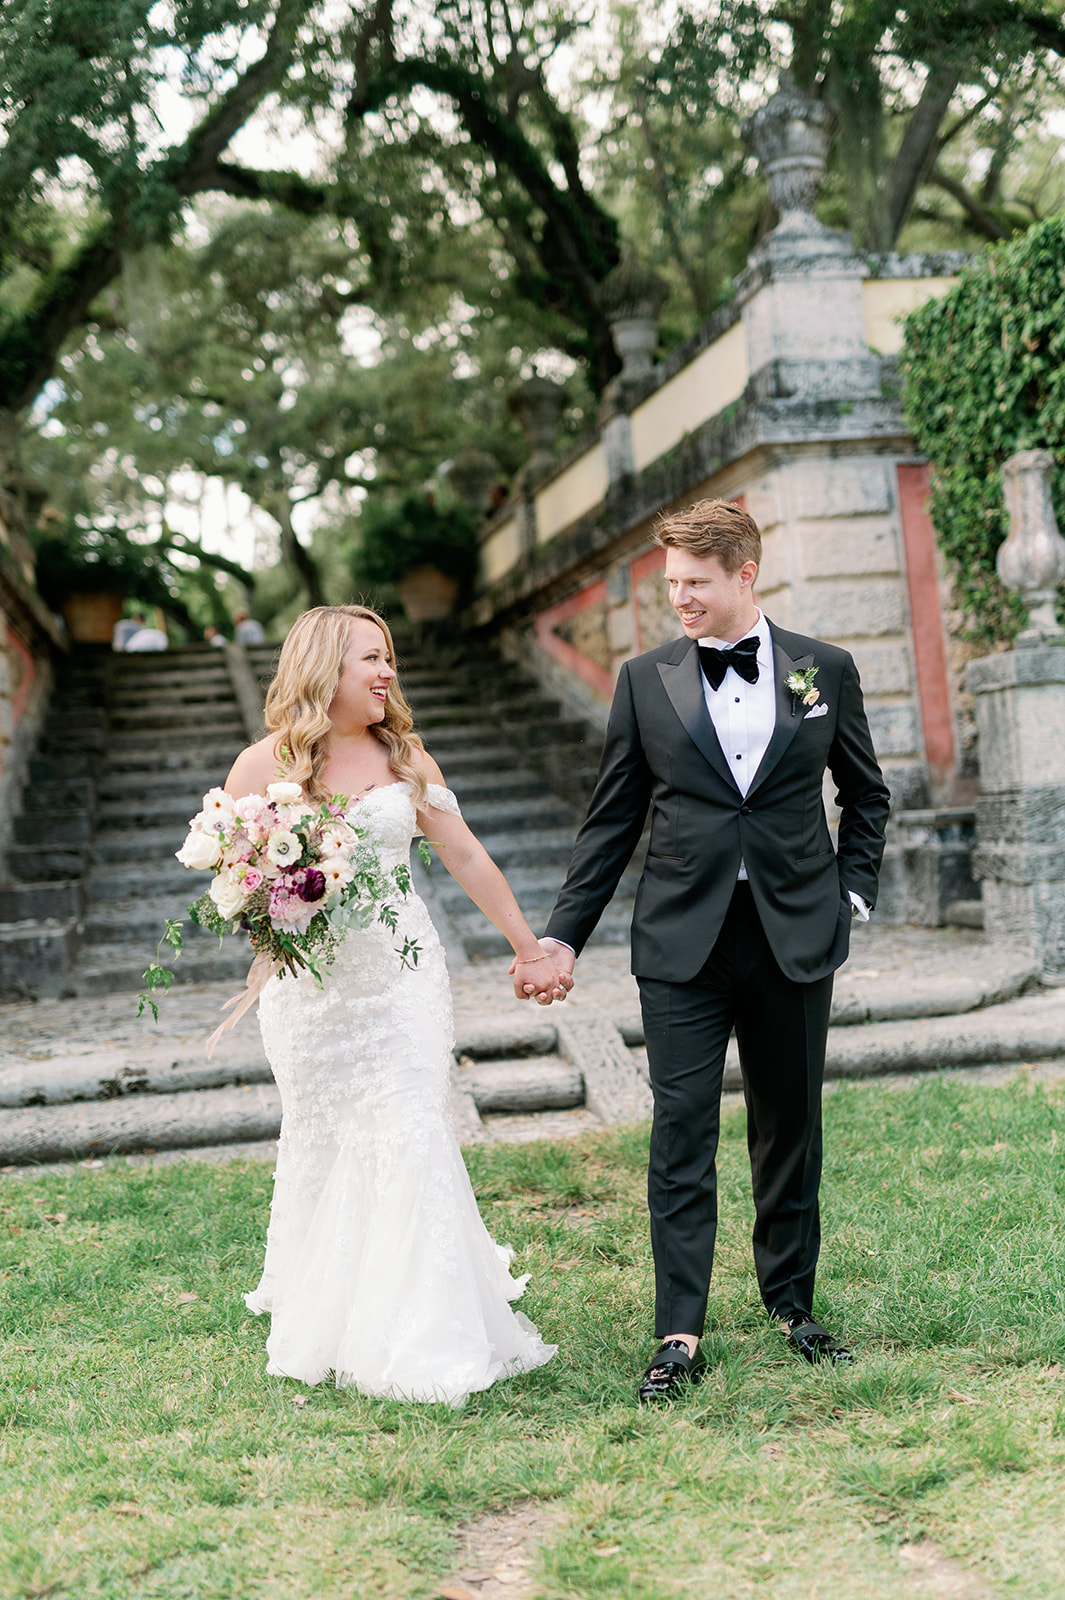 Bride and groom portrait in front of the stone stairs at Vizcaya Museum and Gardens.